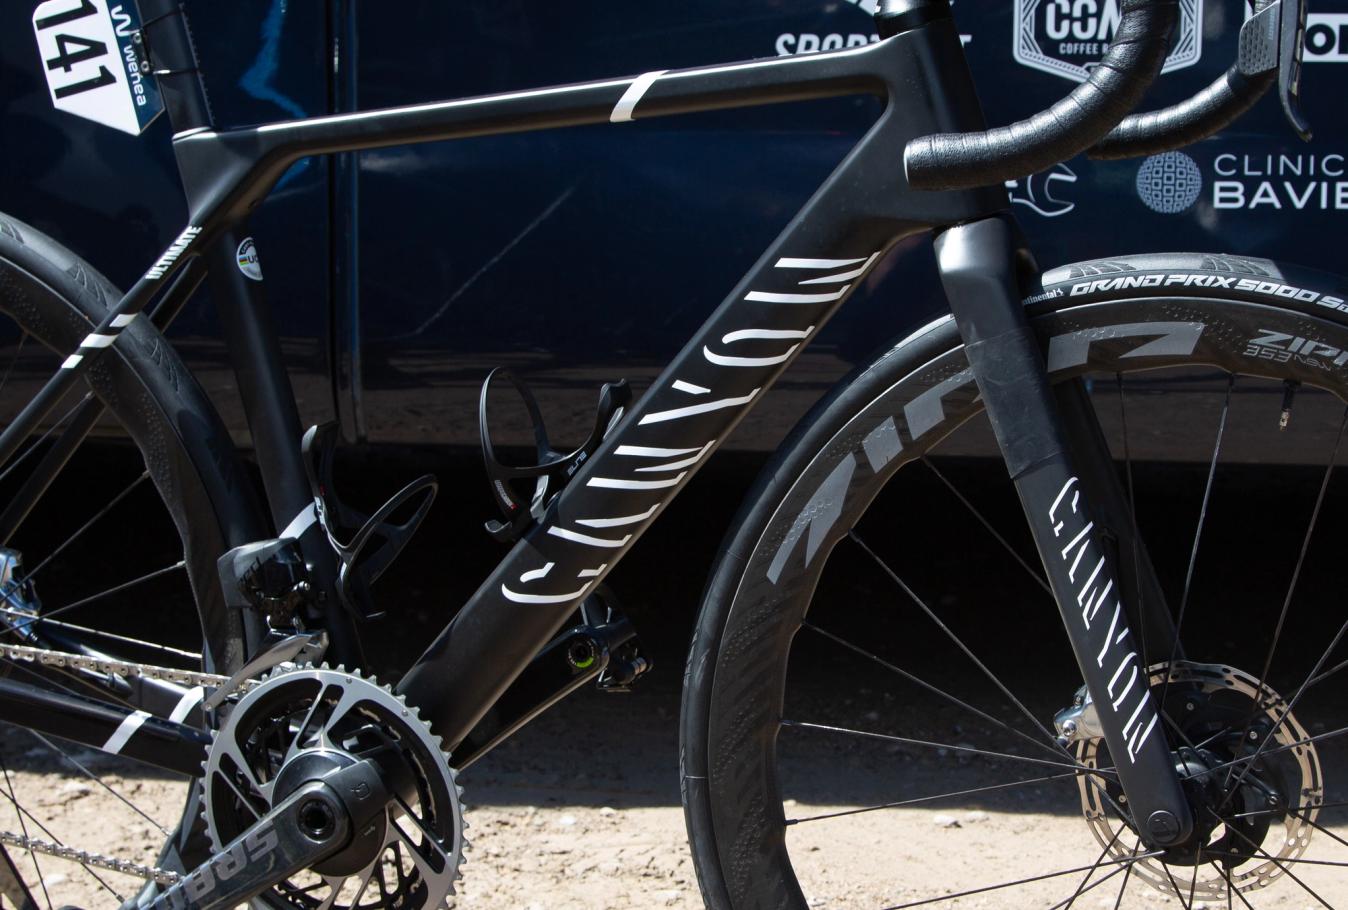 The Canyon Ultimate's lightweight frame